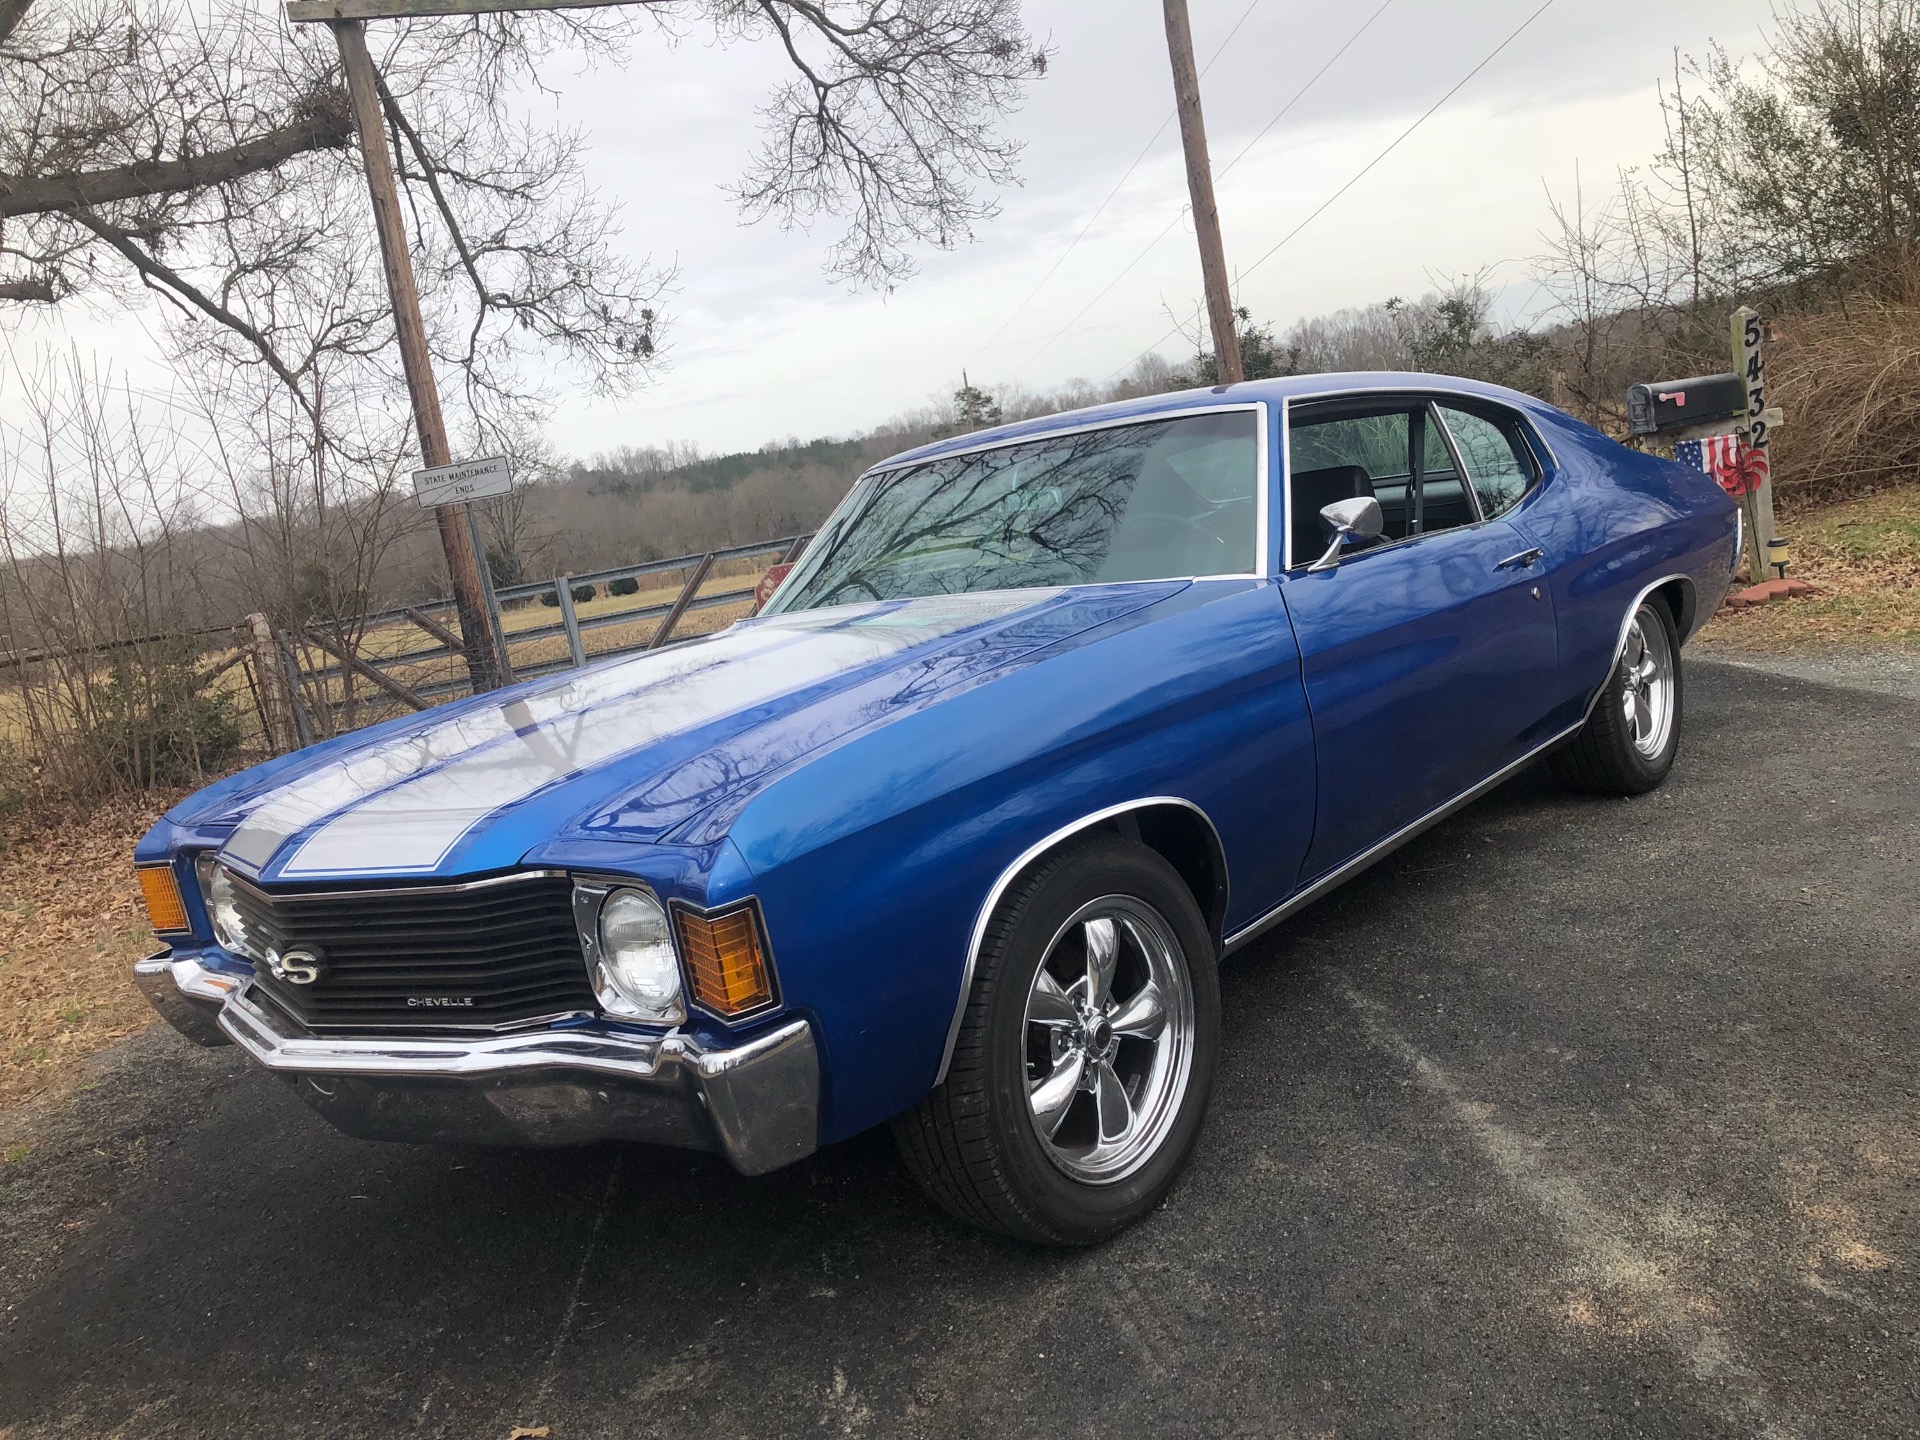 Used 1972 Chevrolet Chevelle -FRAME OFF RESTORED 2017-SS GAUGES-AIR CONDITIONING-SOLID MUSCLE CAR-VIDEO | Mundelein, IL